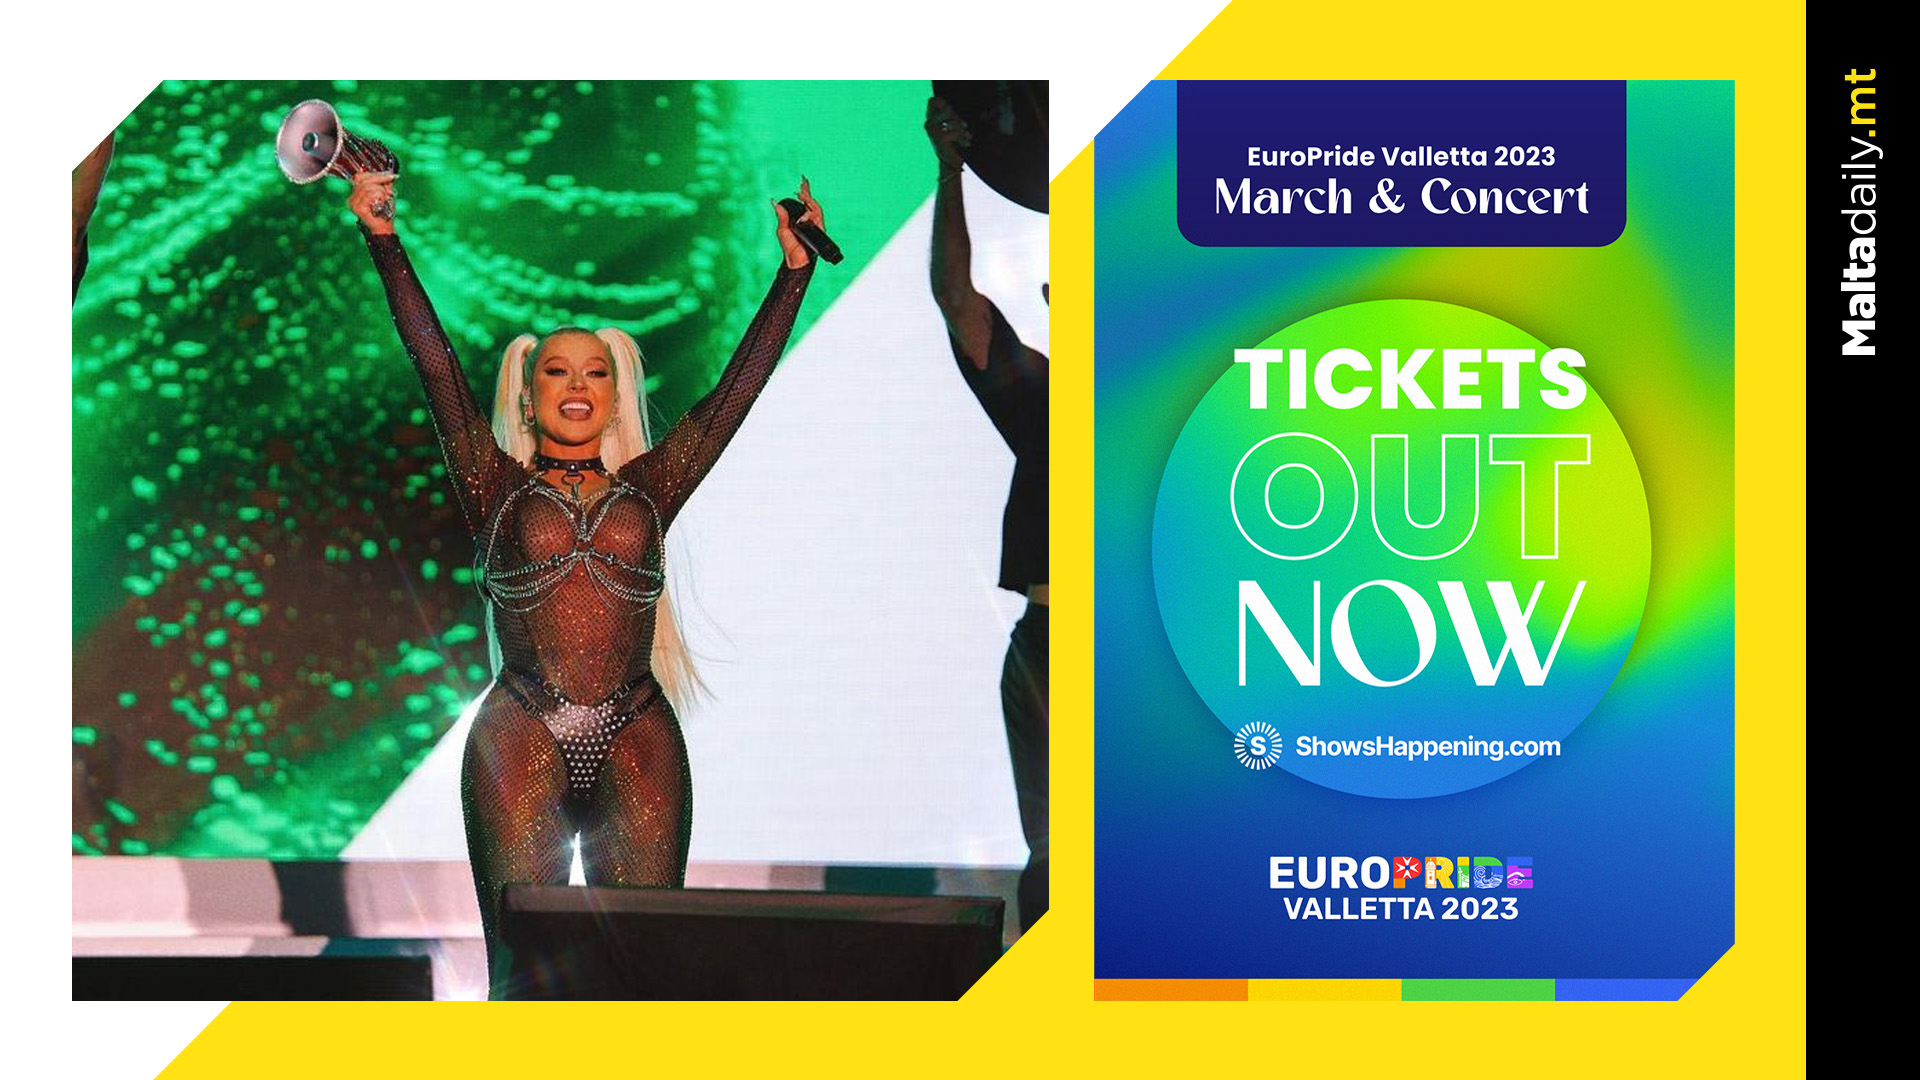 Christina Aguilera Concert & Pride March Tickets Are Out Now!